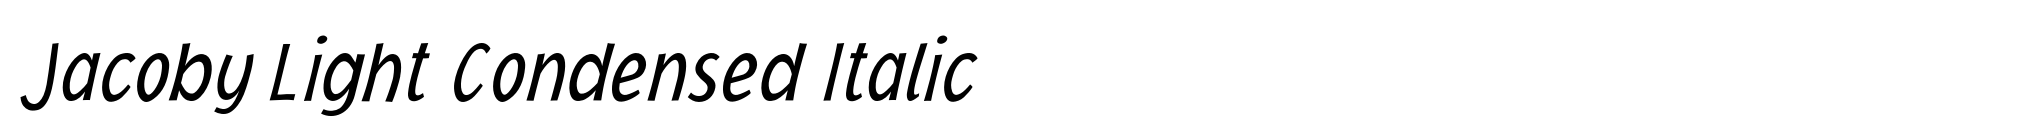 Jacoby Light Condensed Italic image